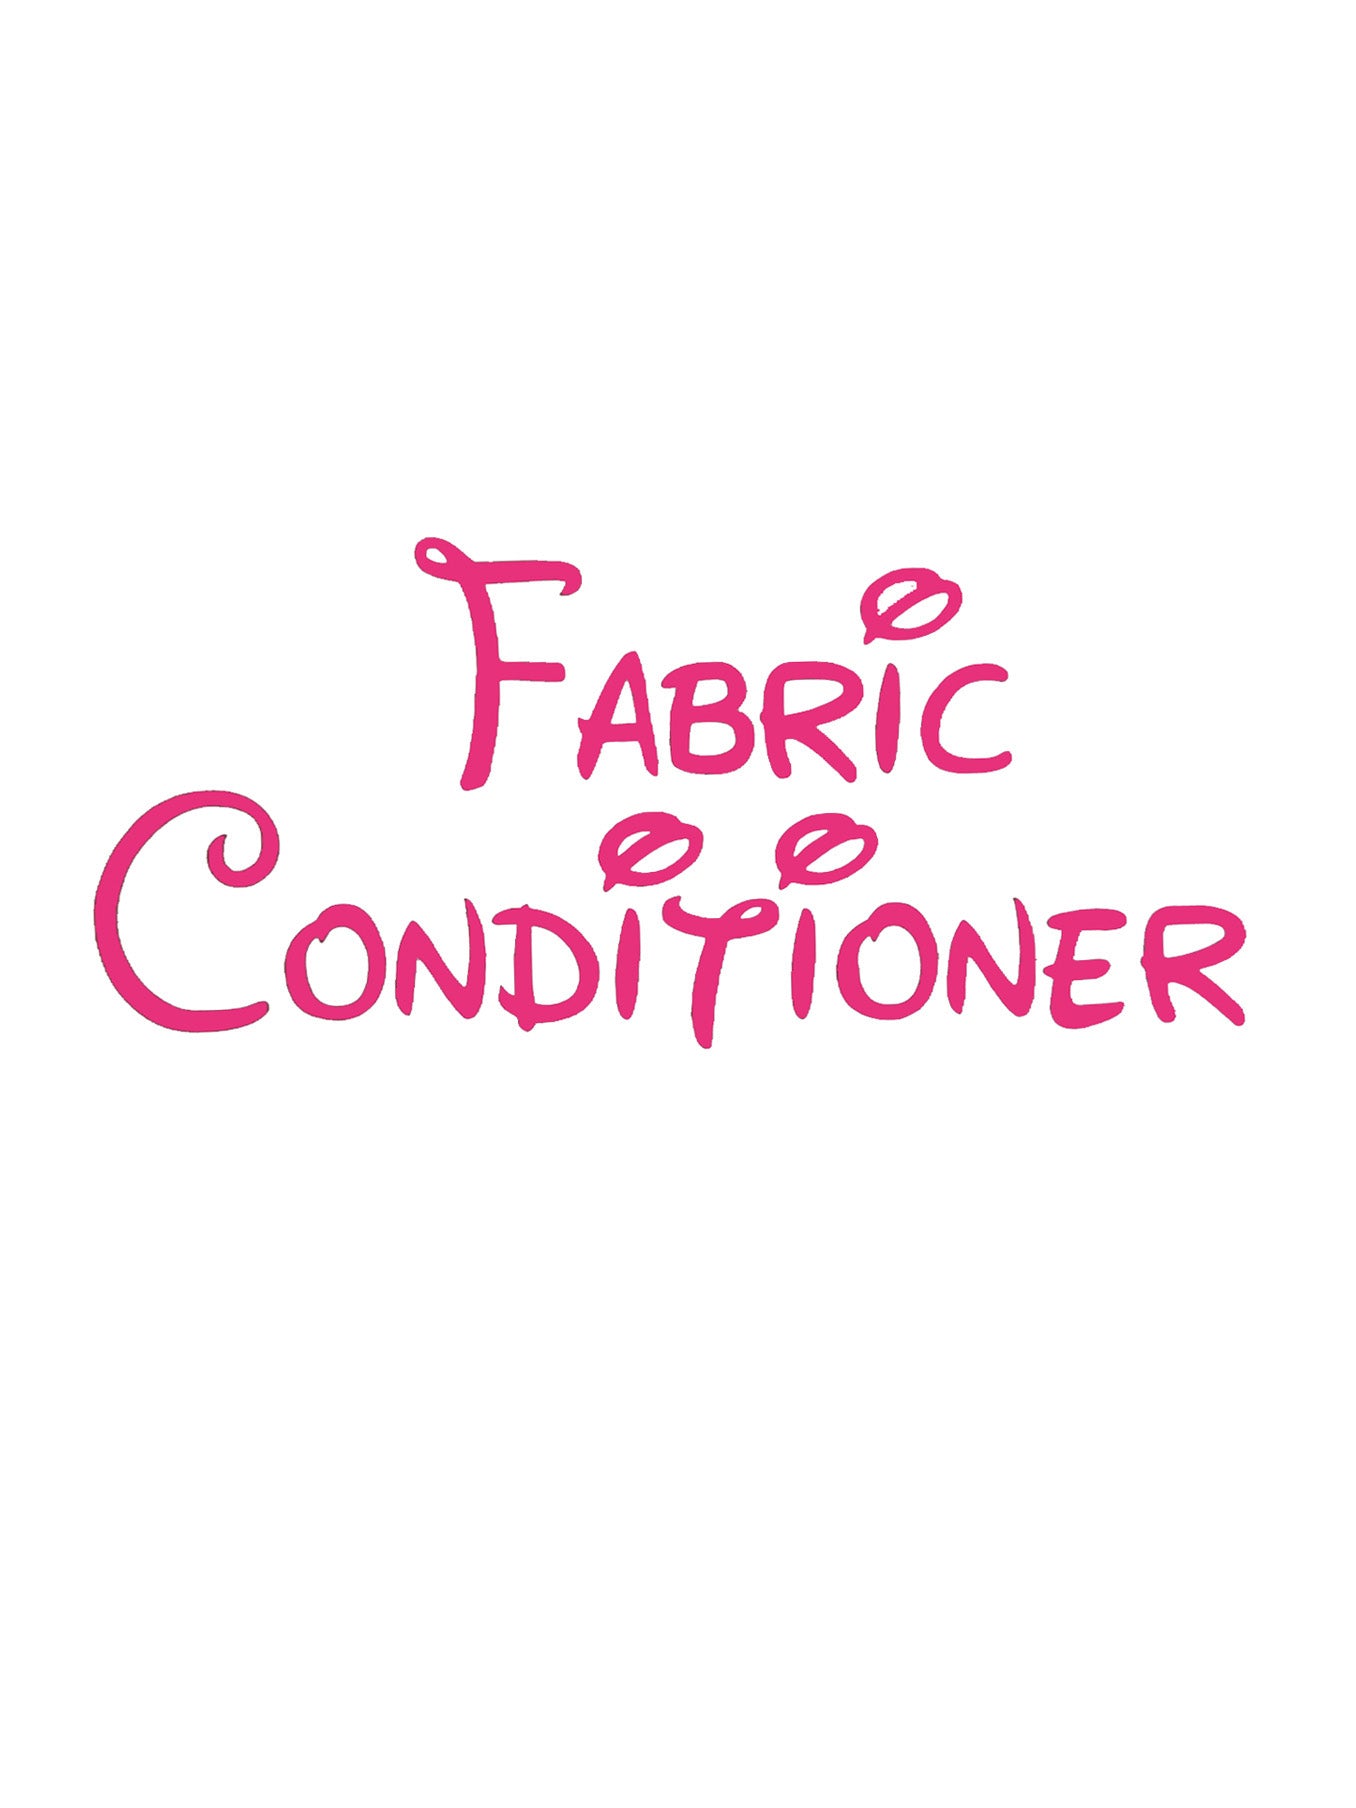 Fabric Conditioner Laundry Decal - A Vinyl Sticker Decal